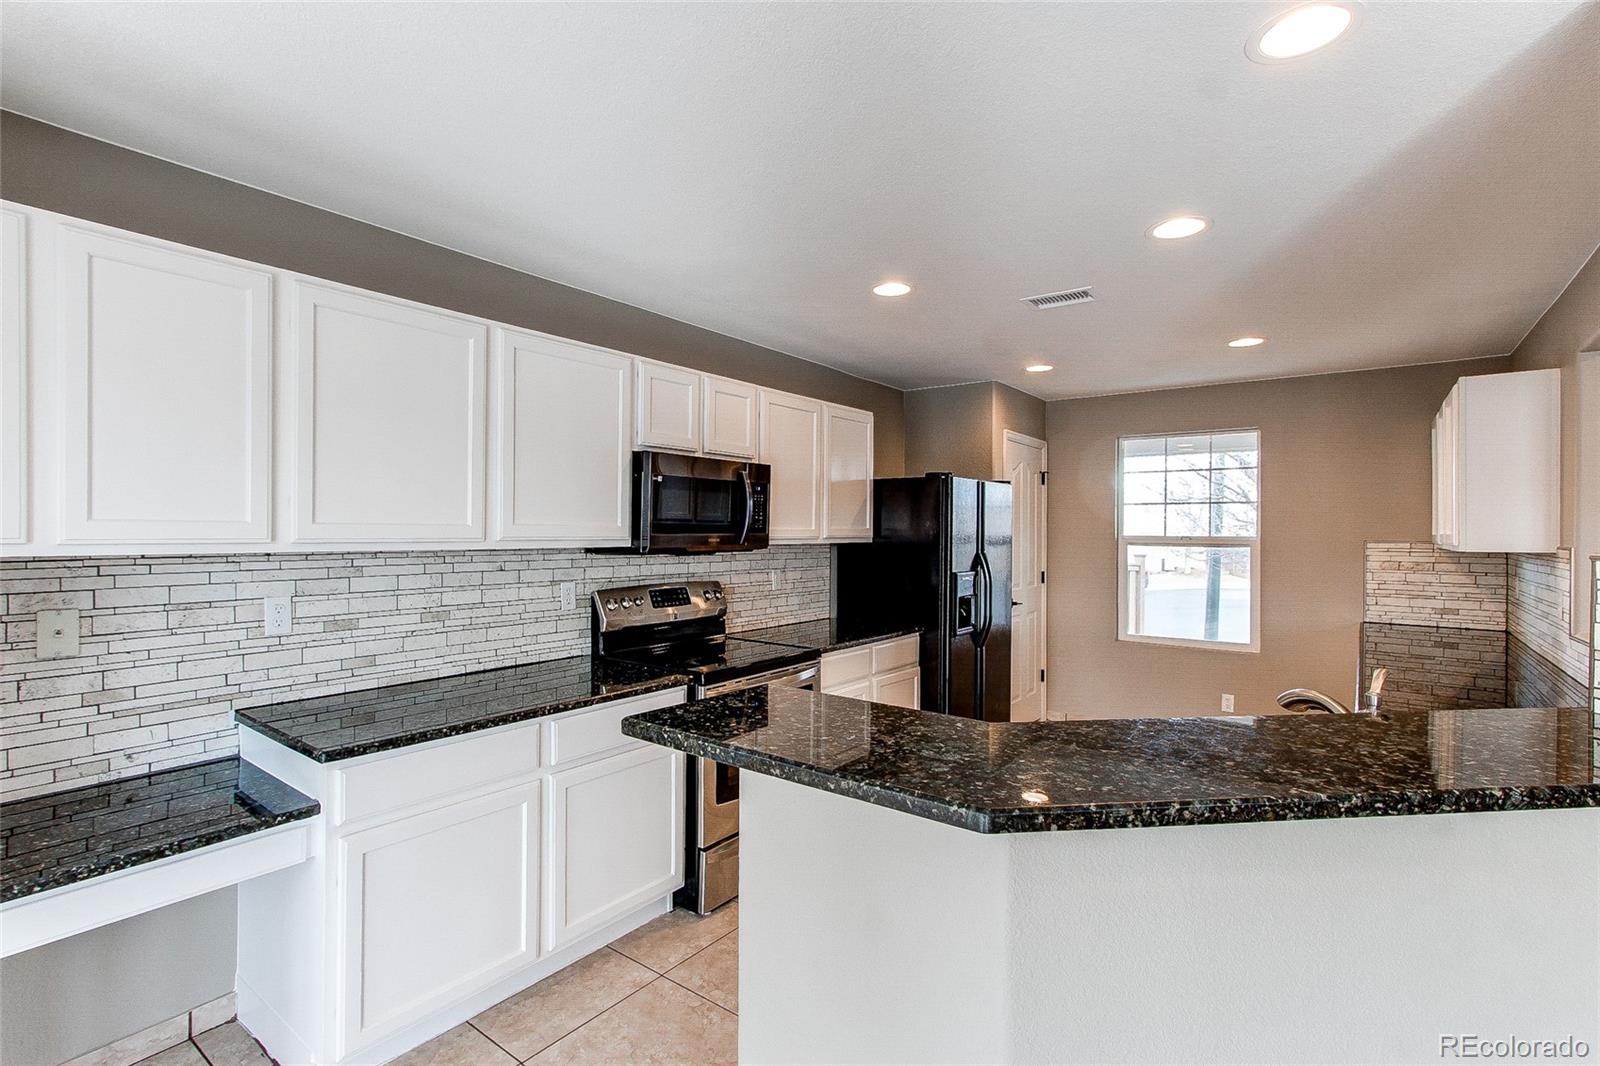 15606  randolph place, denver sold home. Closed on 2024-03-15 for $540,000.